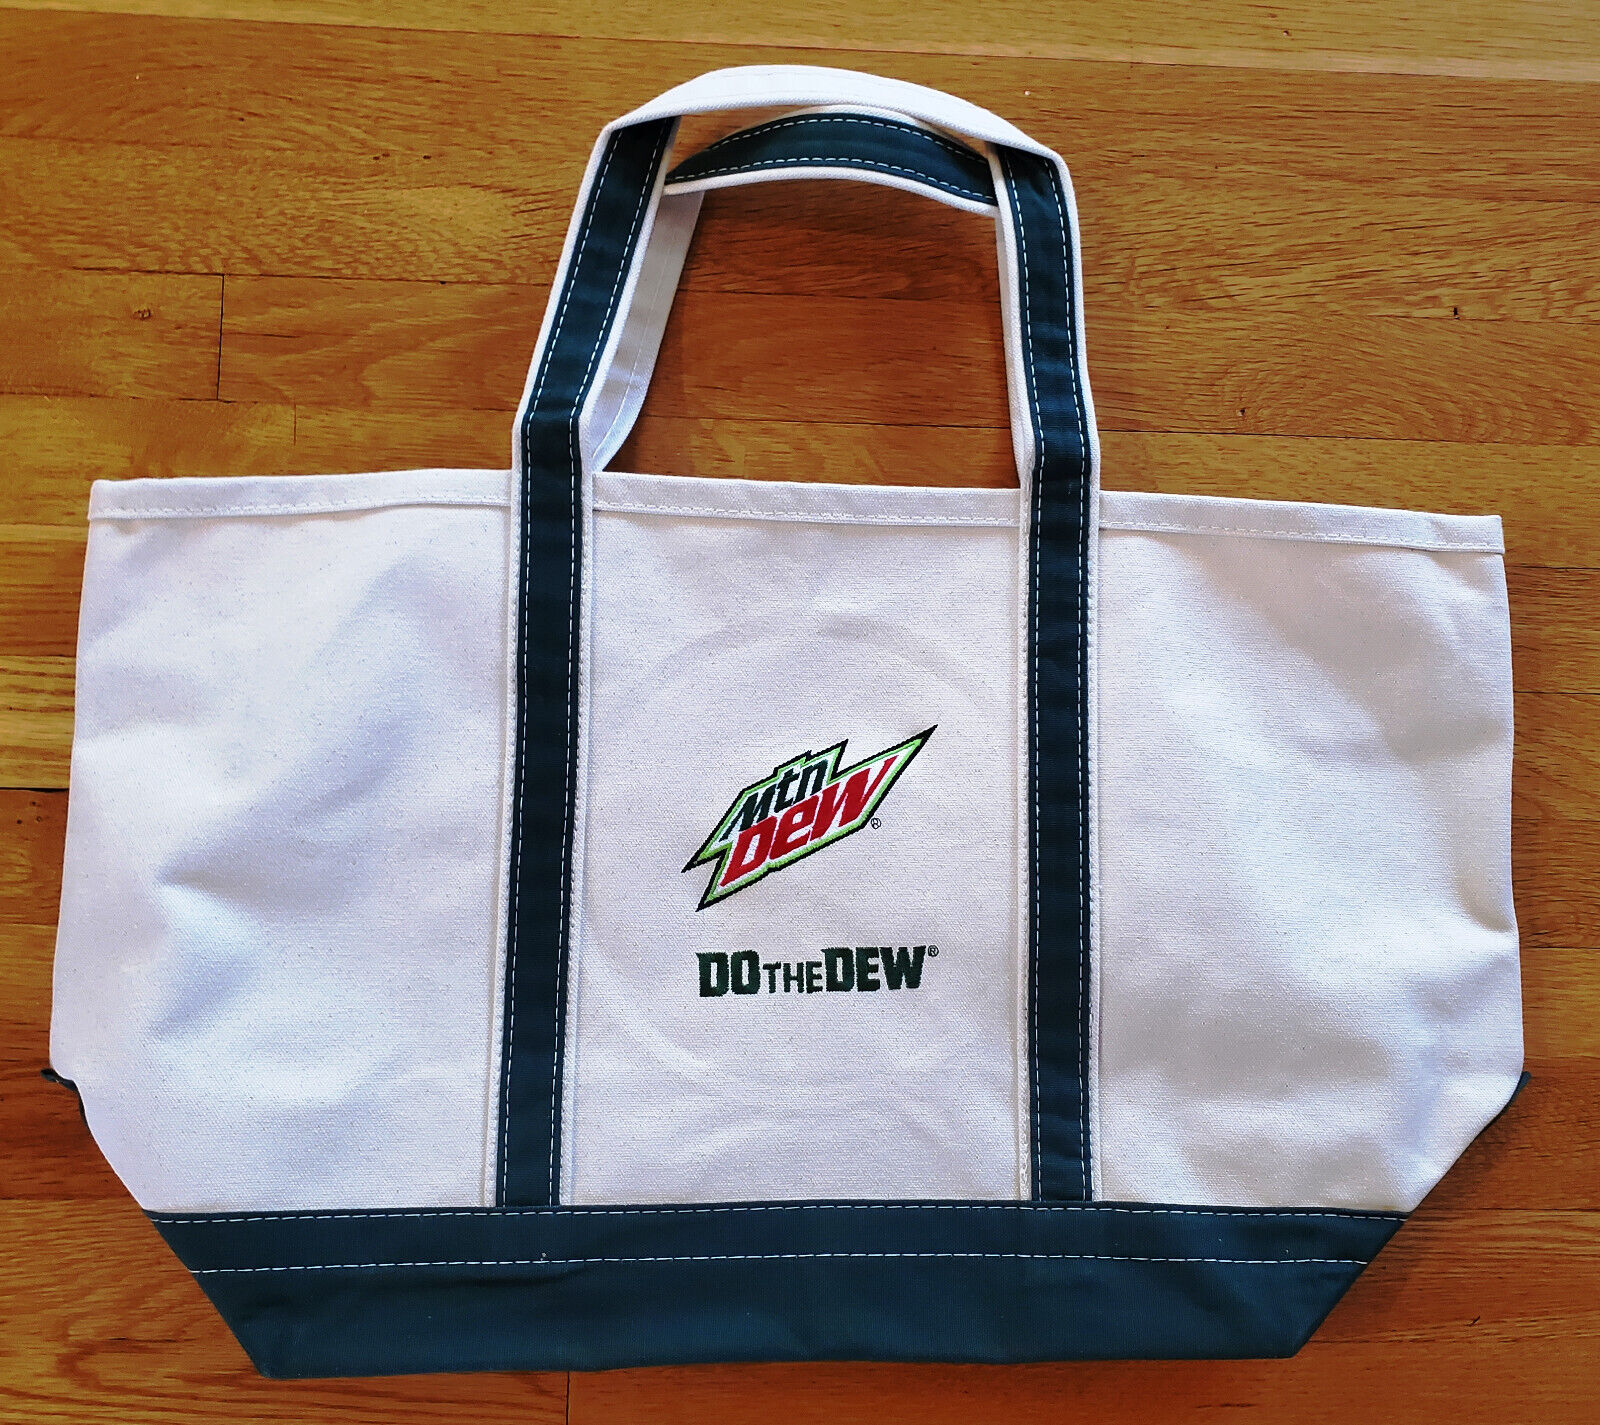 Mountain MTN DEW Canvas Tote Bag Do the Dew LIMITED EDITION Promo NEW Rare